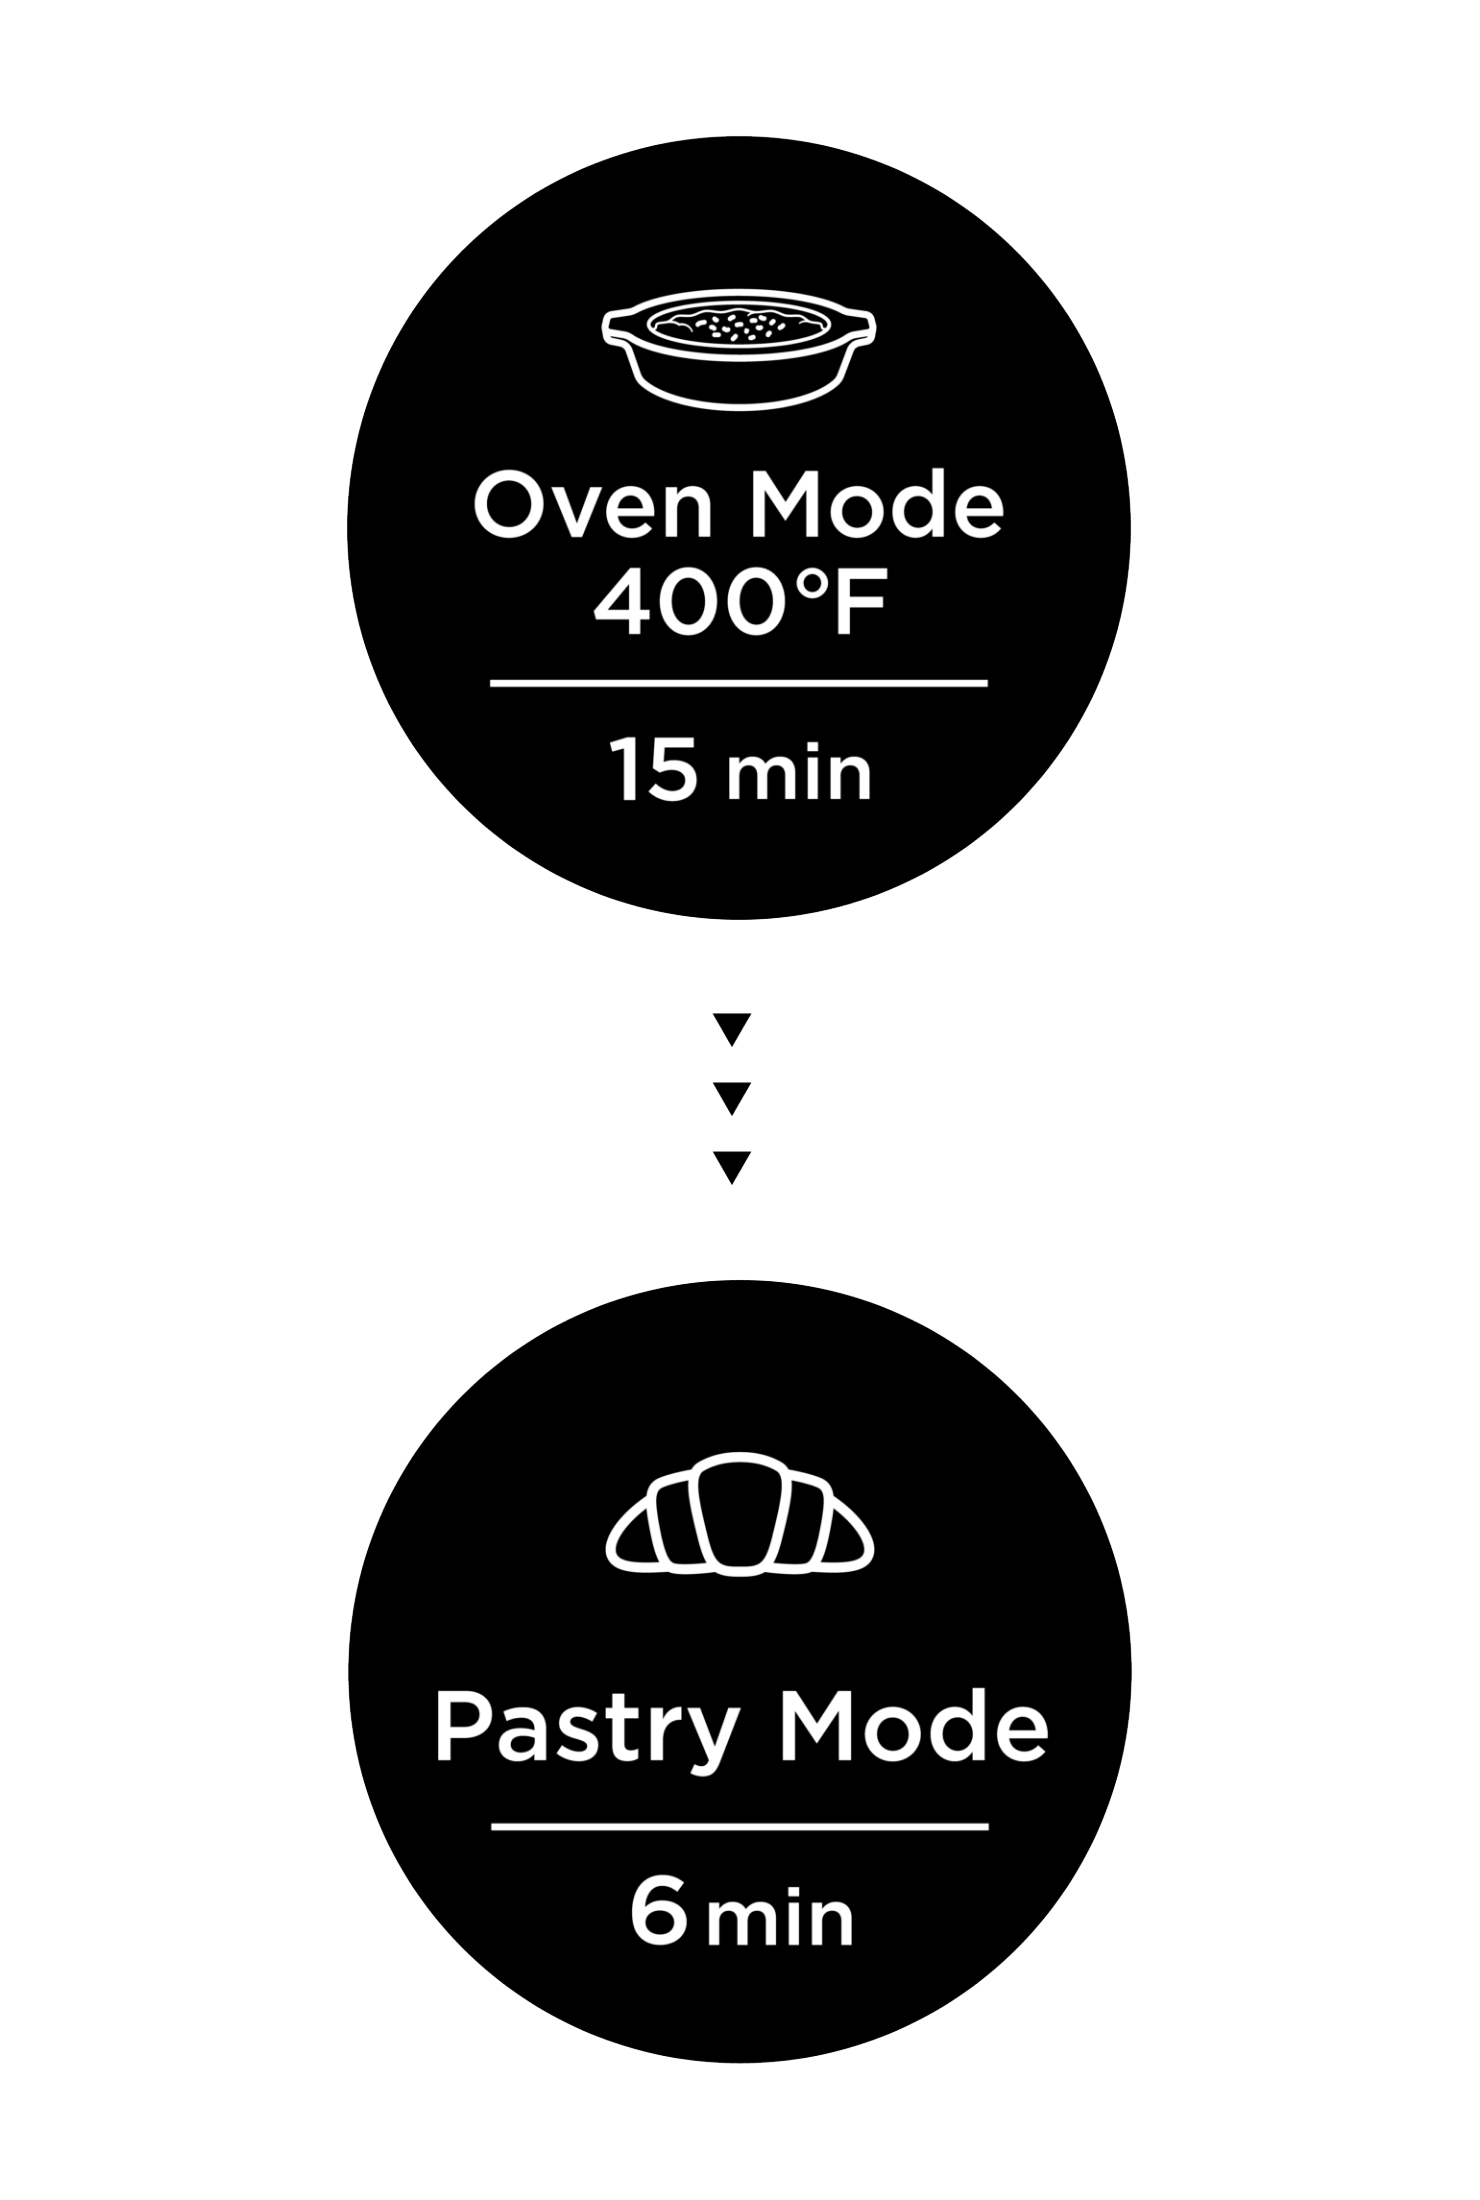 Oven mode for 15 minutes